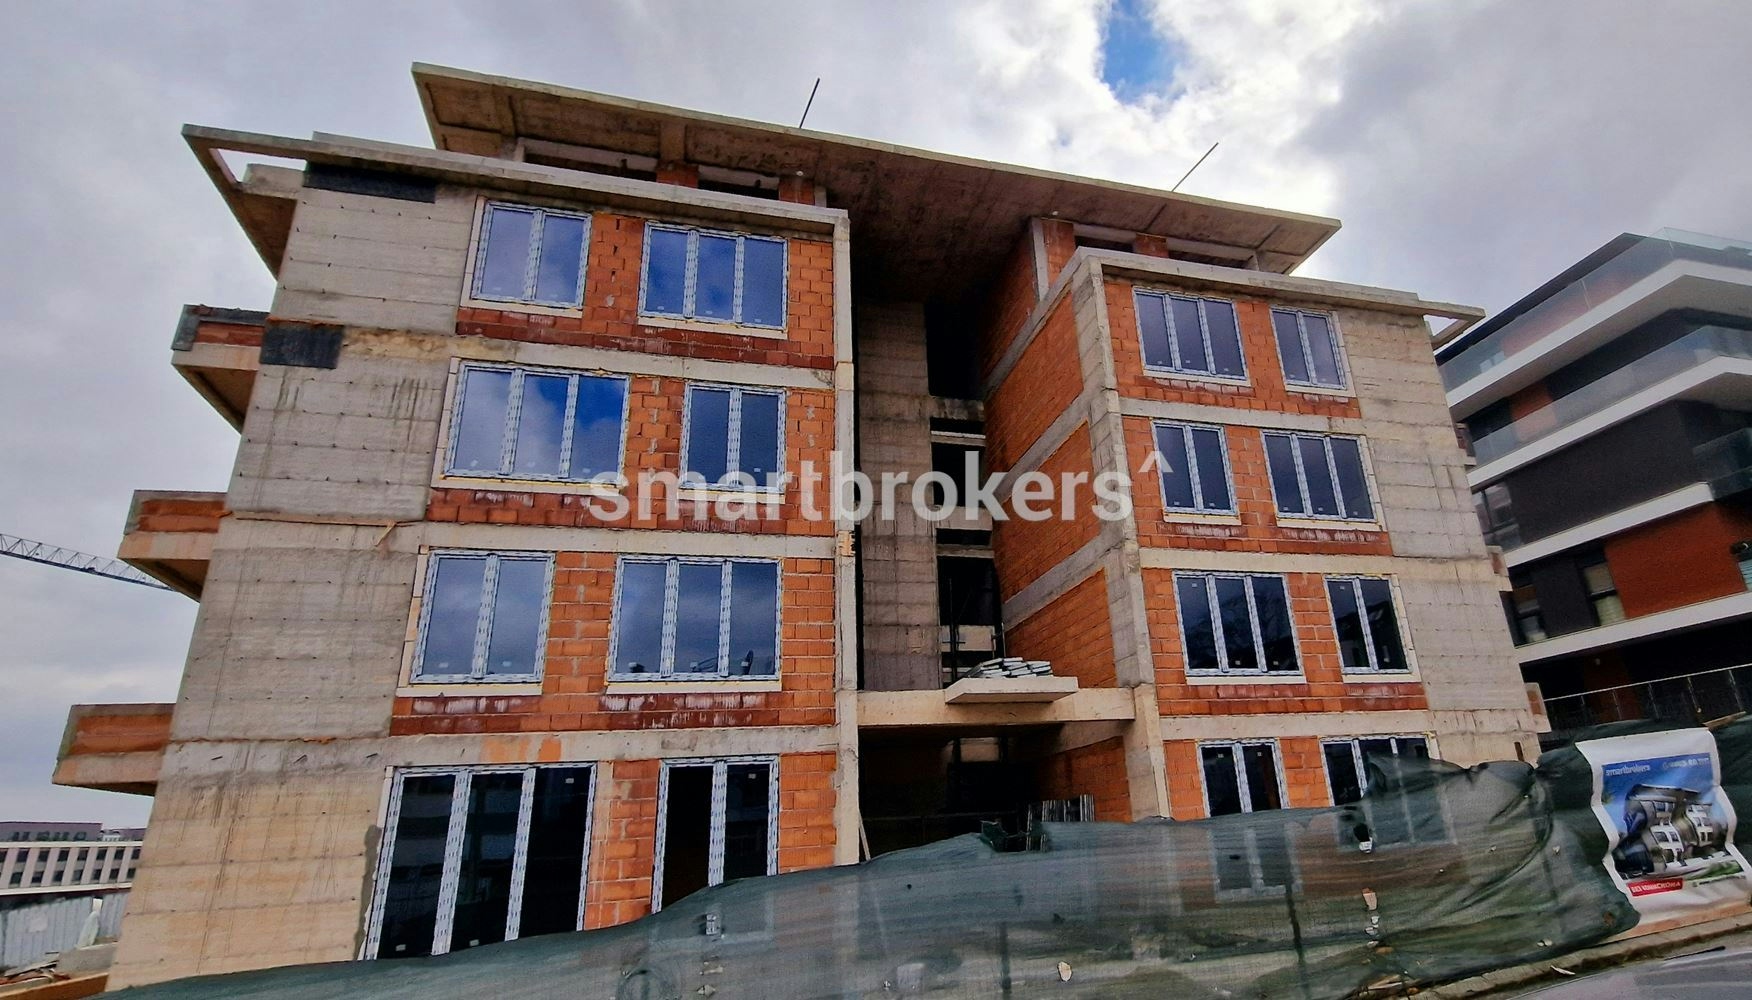 Southern one-bedroom apartment with its own yard in Dragalevtsi district next to Lidl